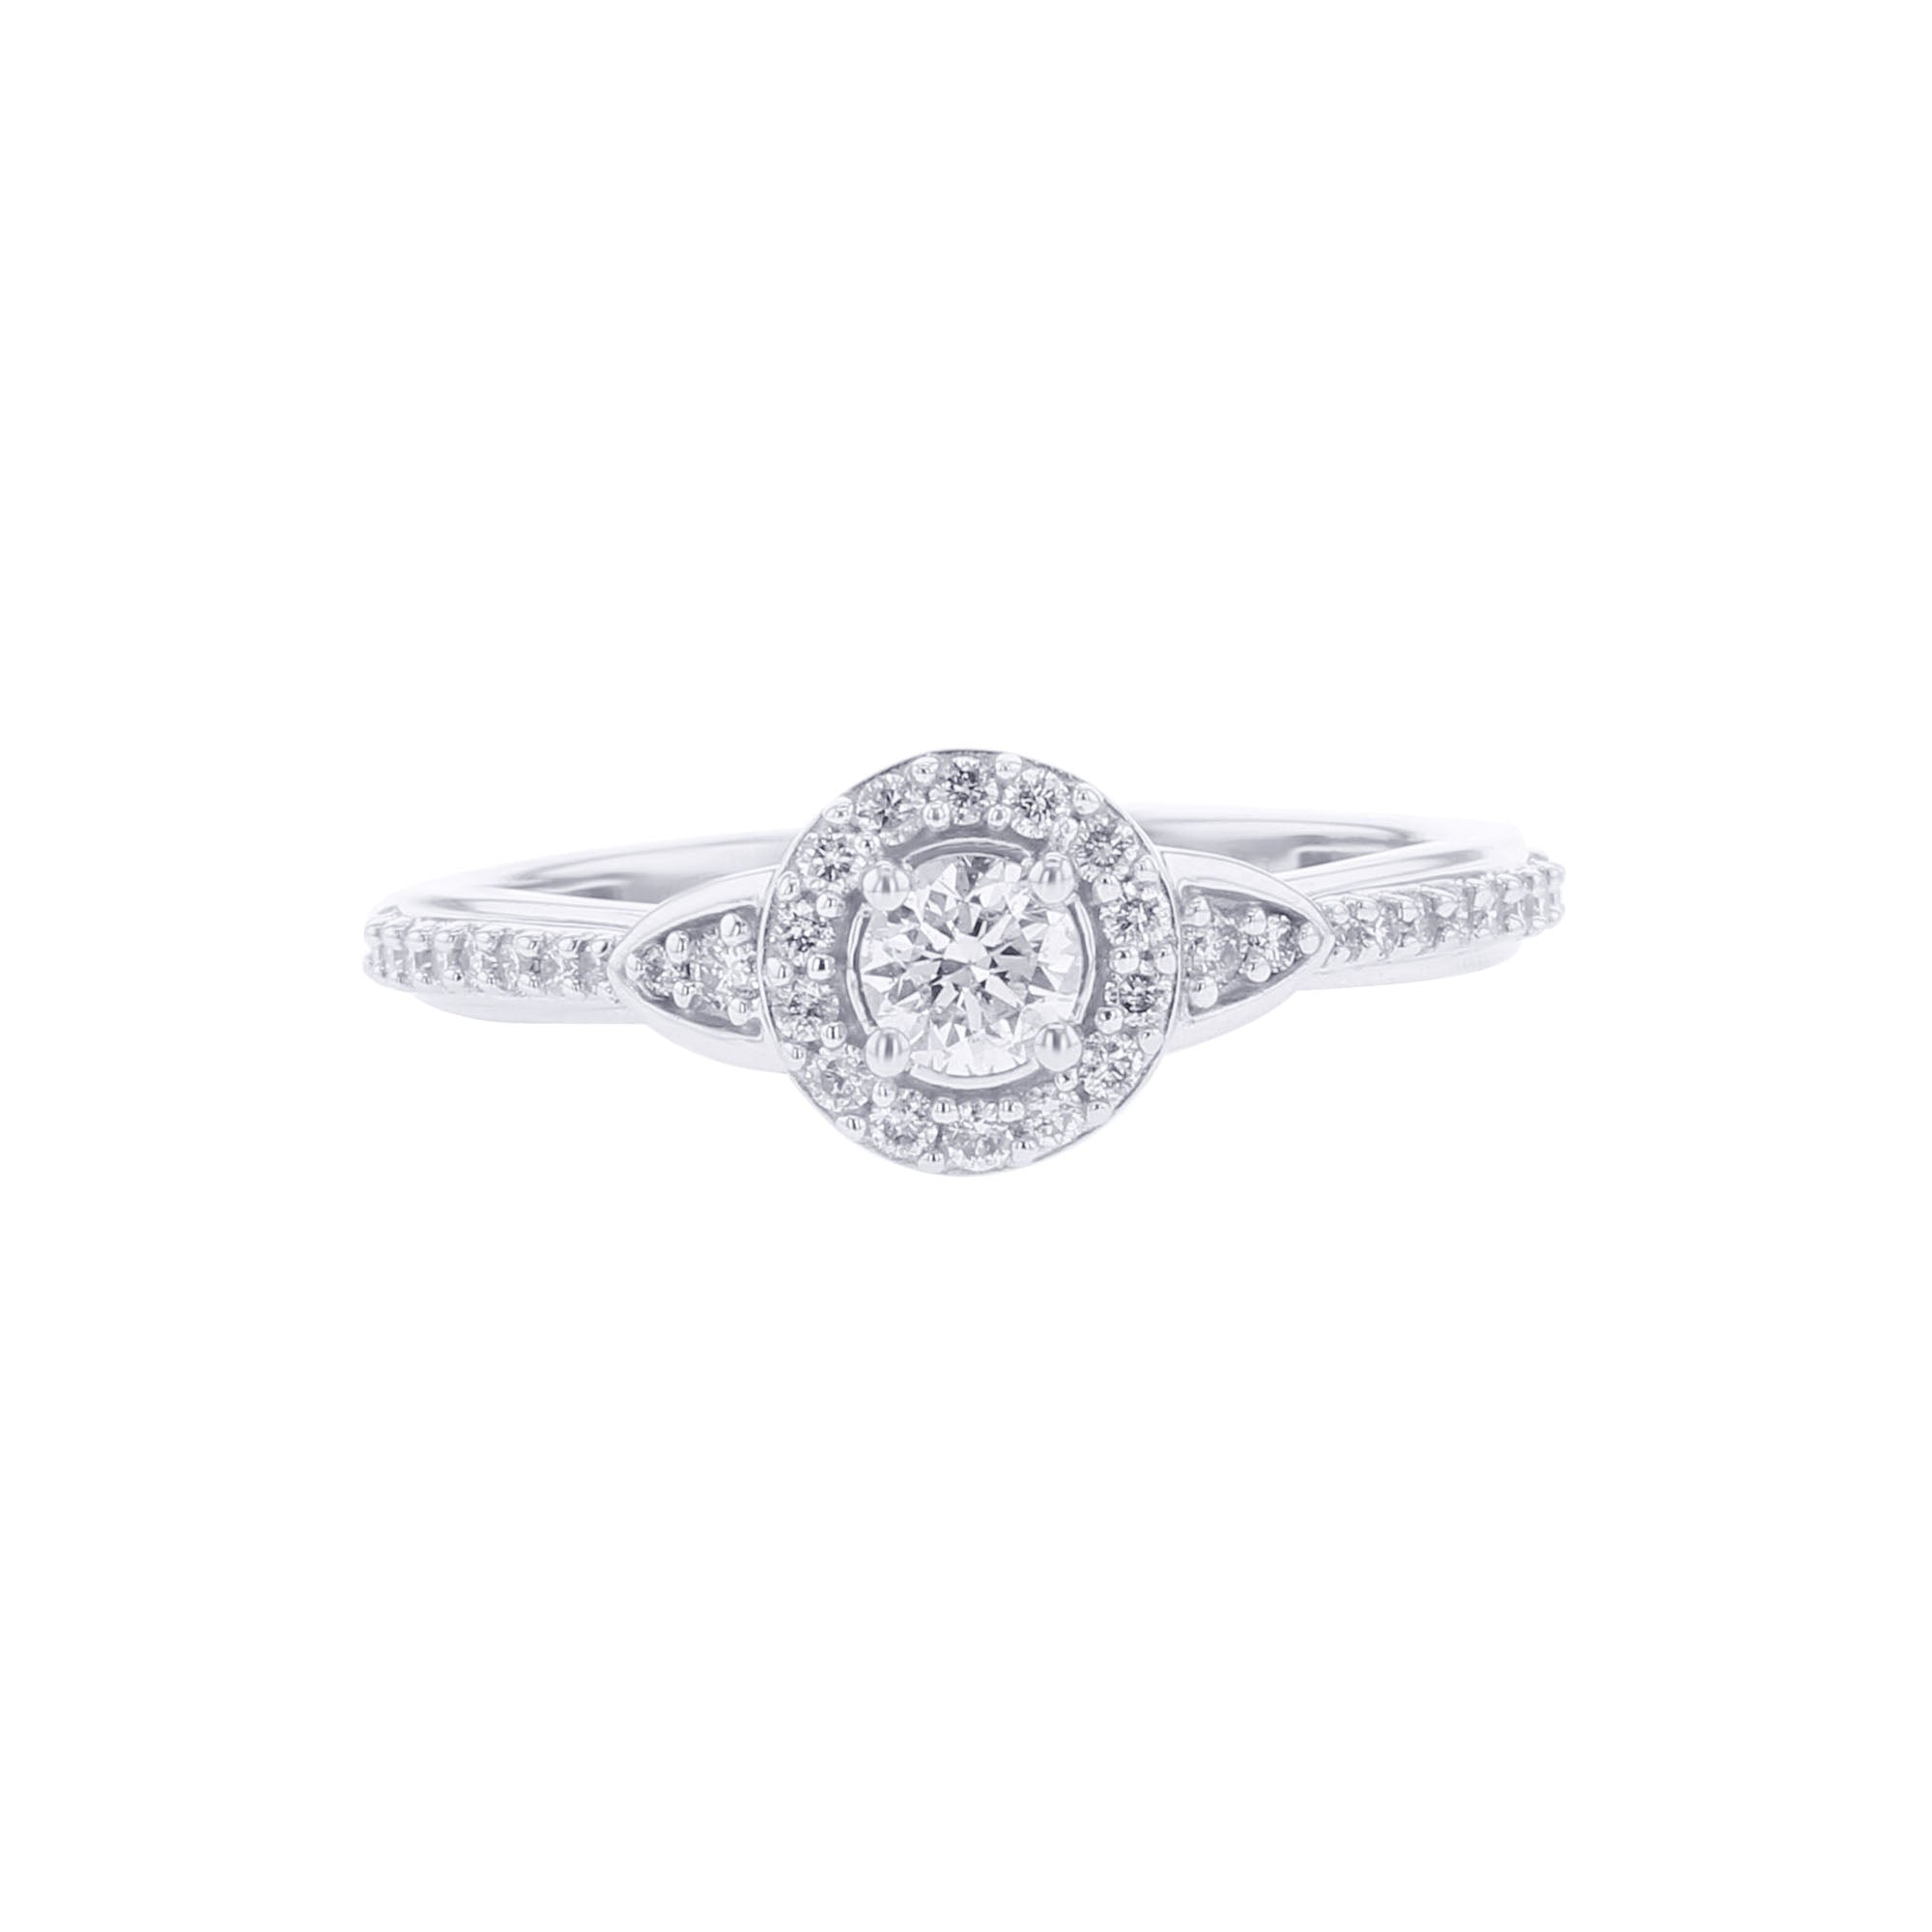 Paola Round Halo Ready for Love Diamond Engagement Ring